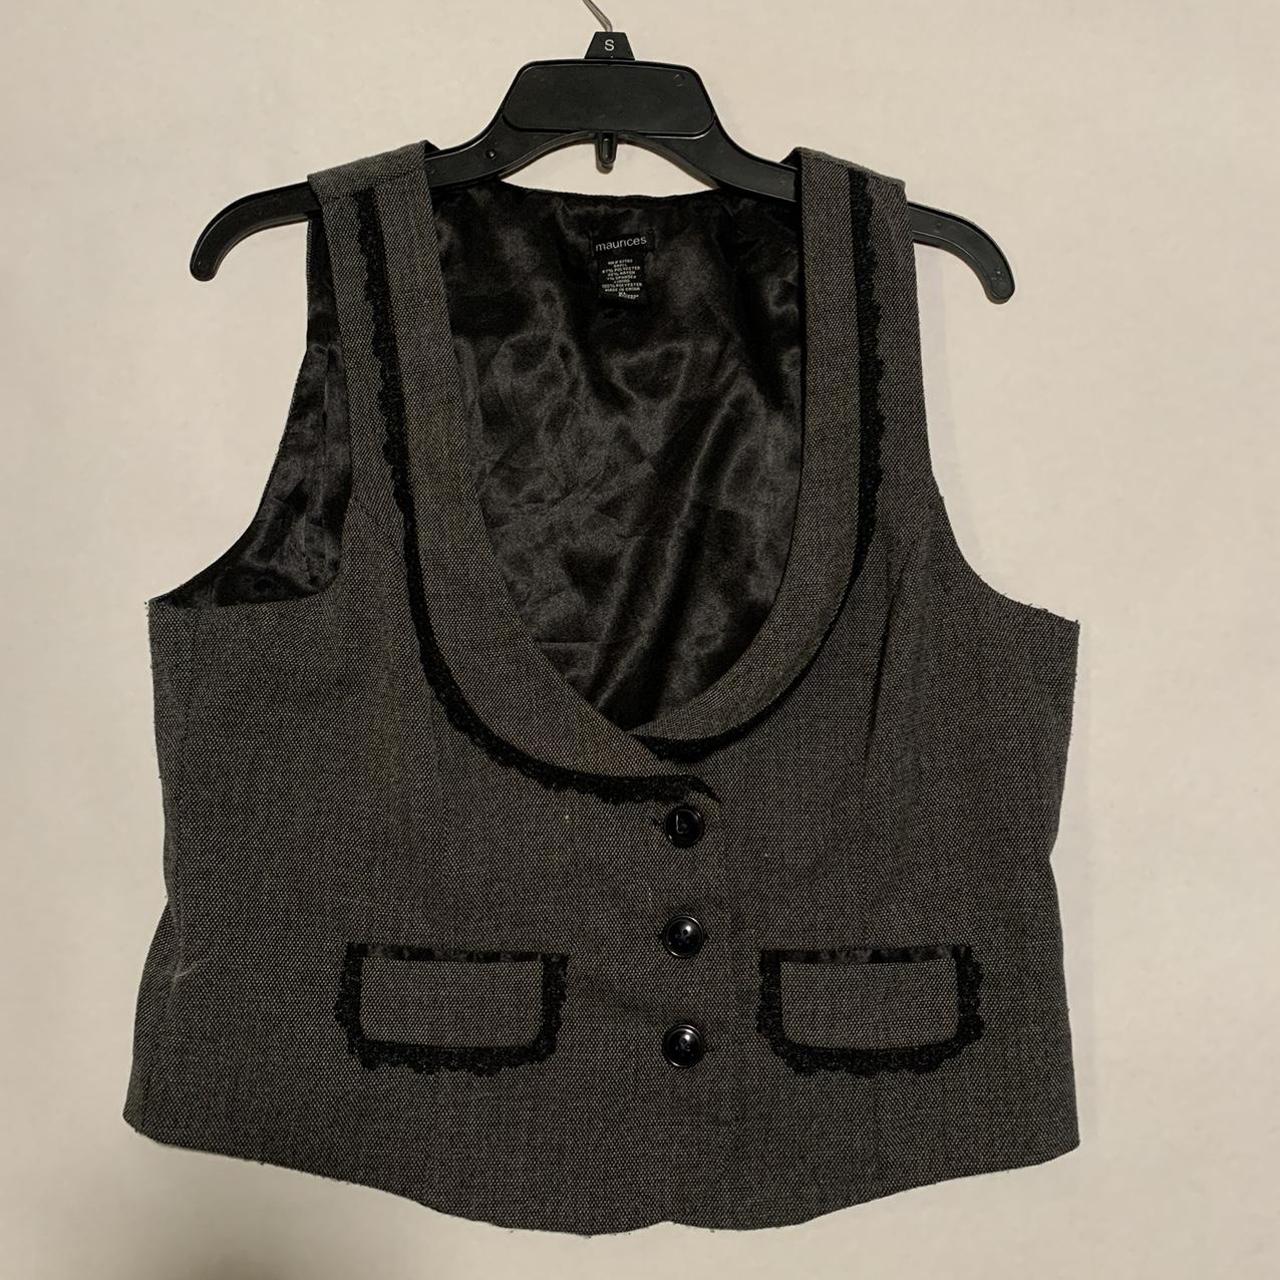 Maurices Women's Grey and Black Gilet (2)